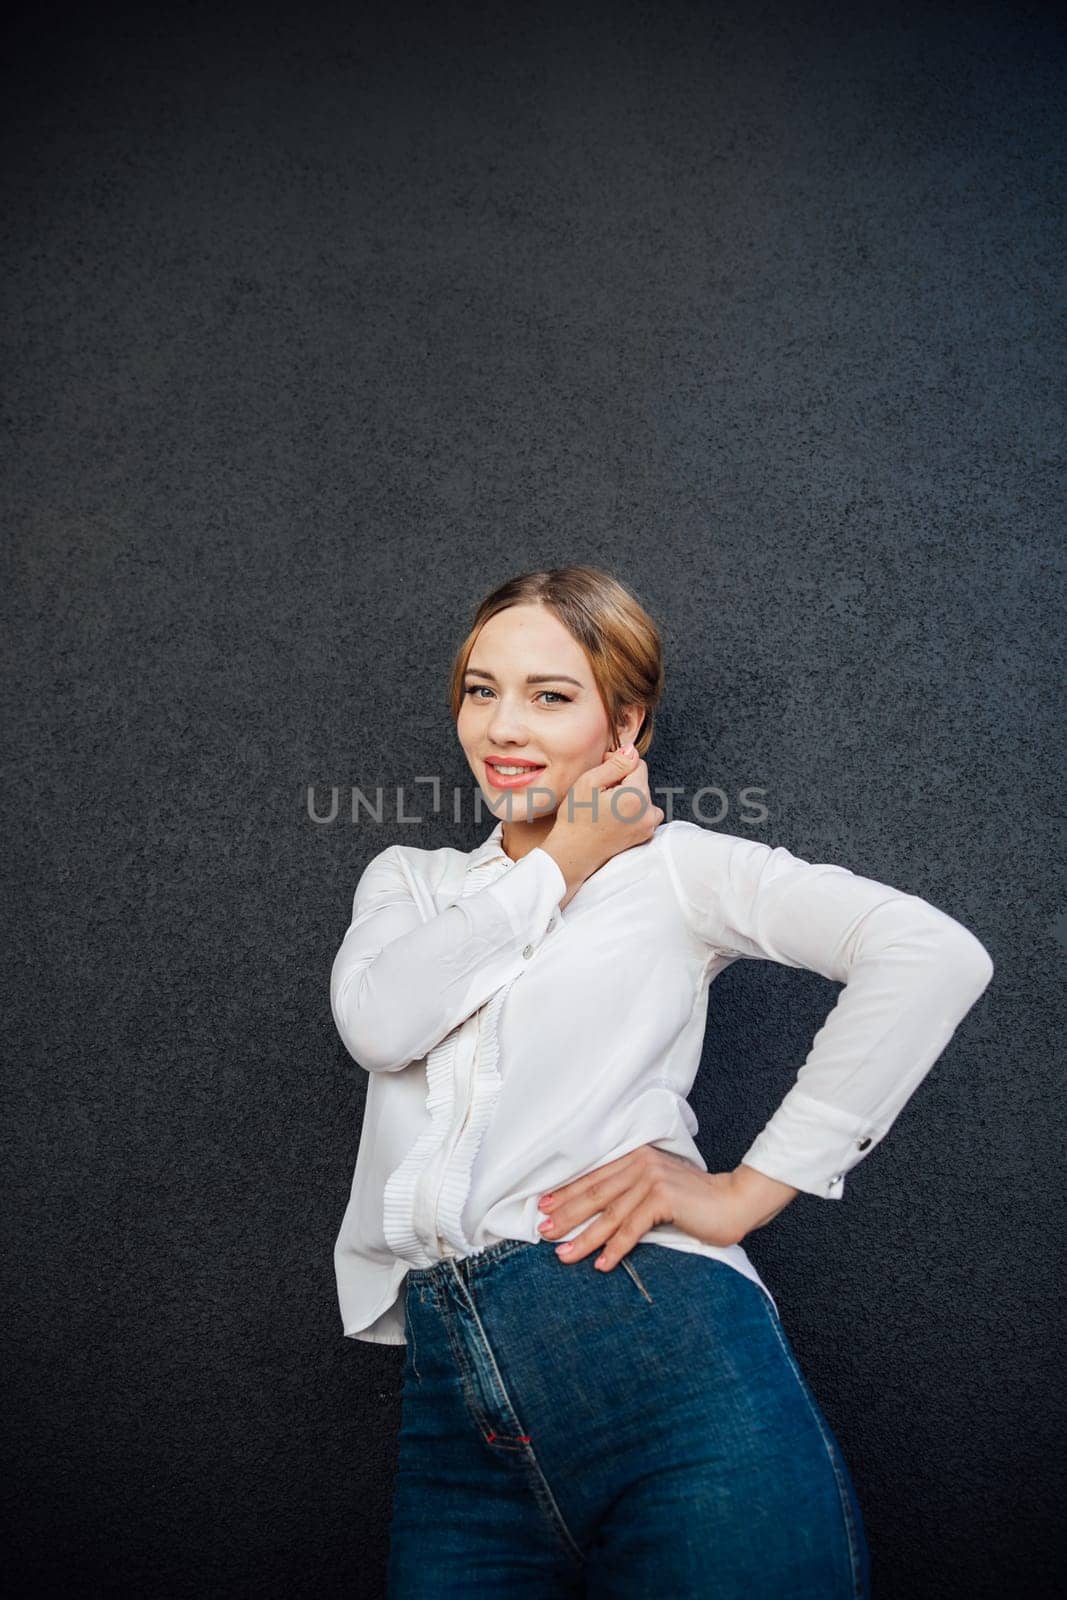 fashionable woman in jeans poses against a black wall